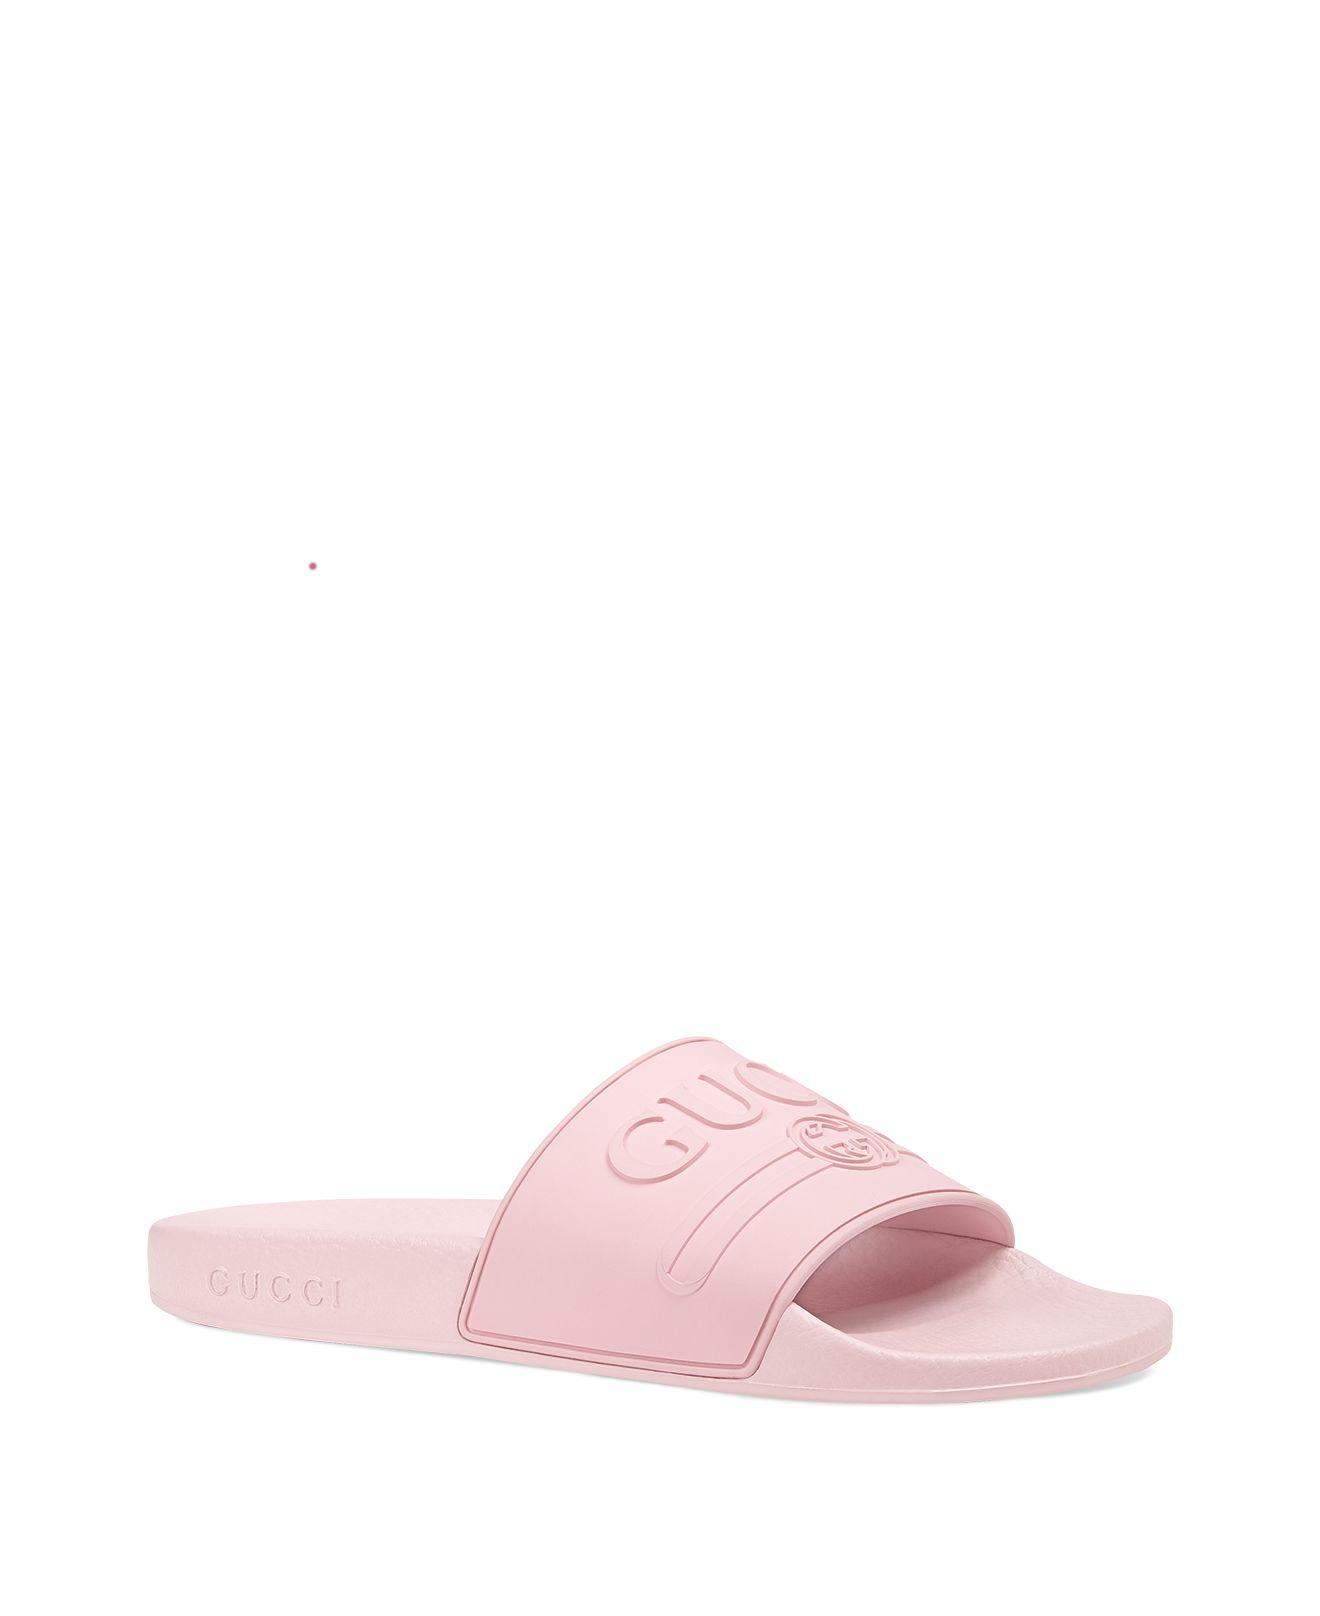 gucci slides all pink